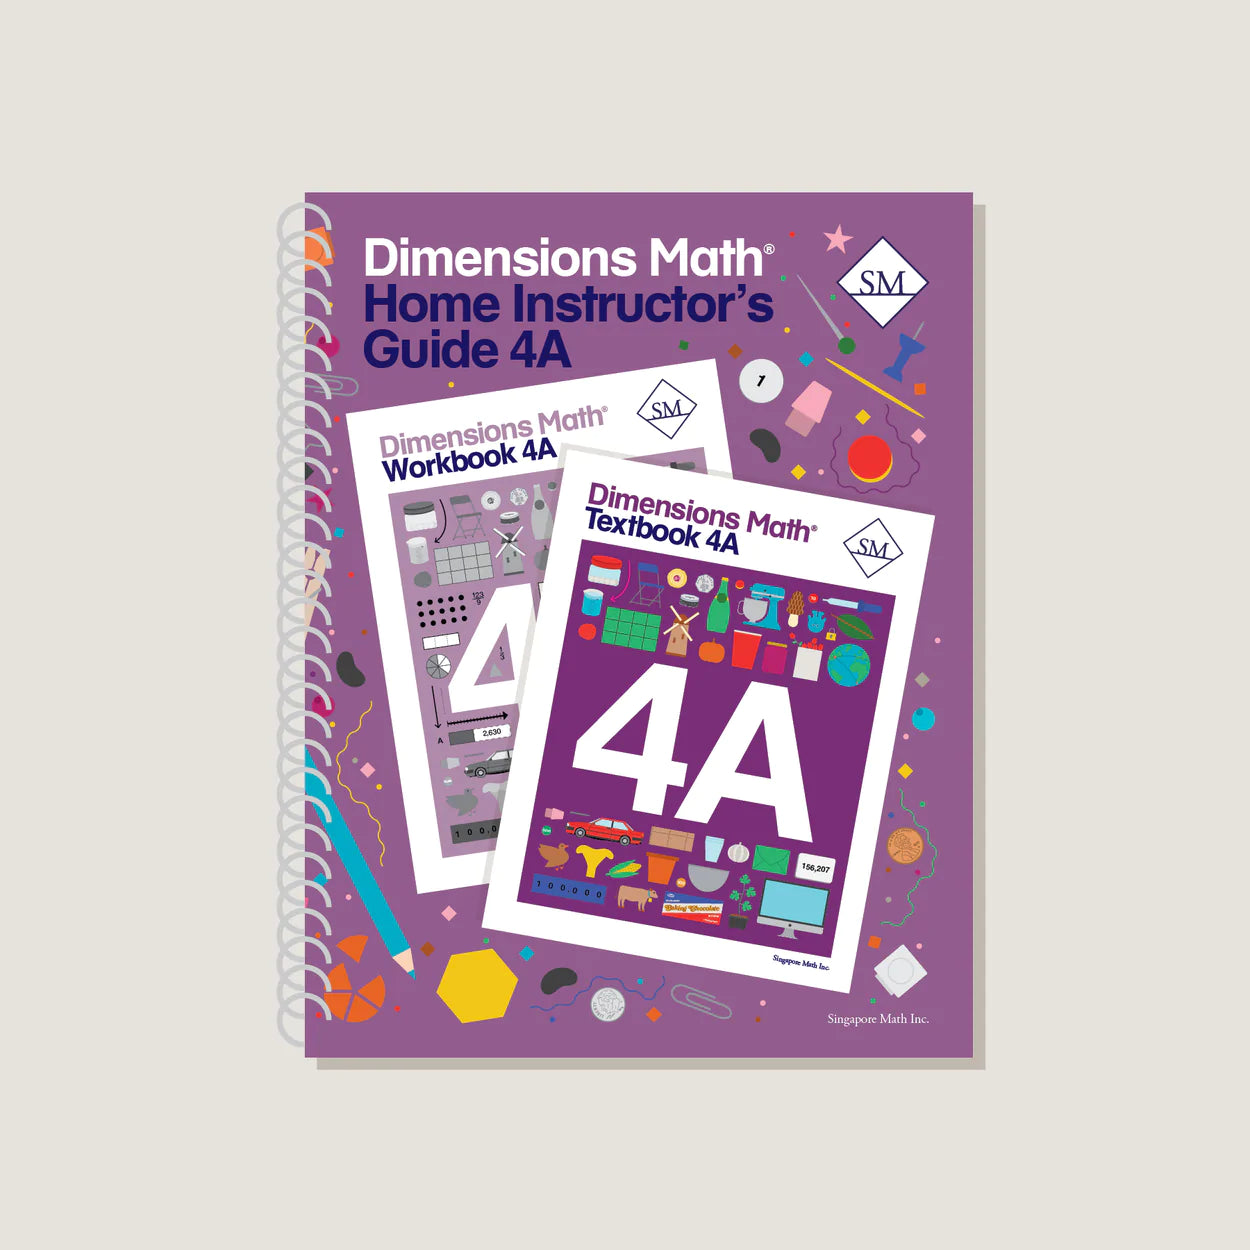 Dimensions Math Home Instructor's Guide 4A (G956)